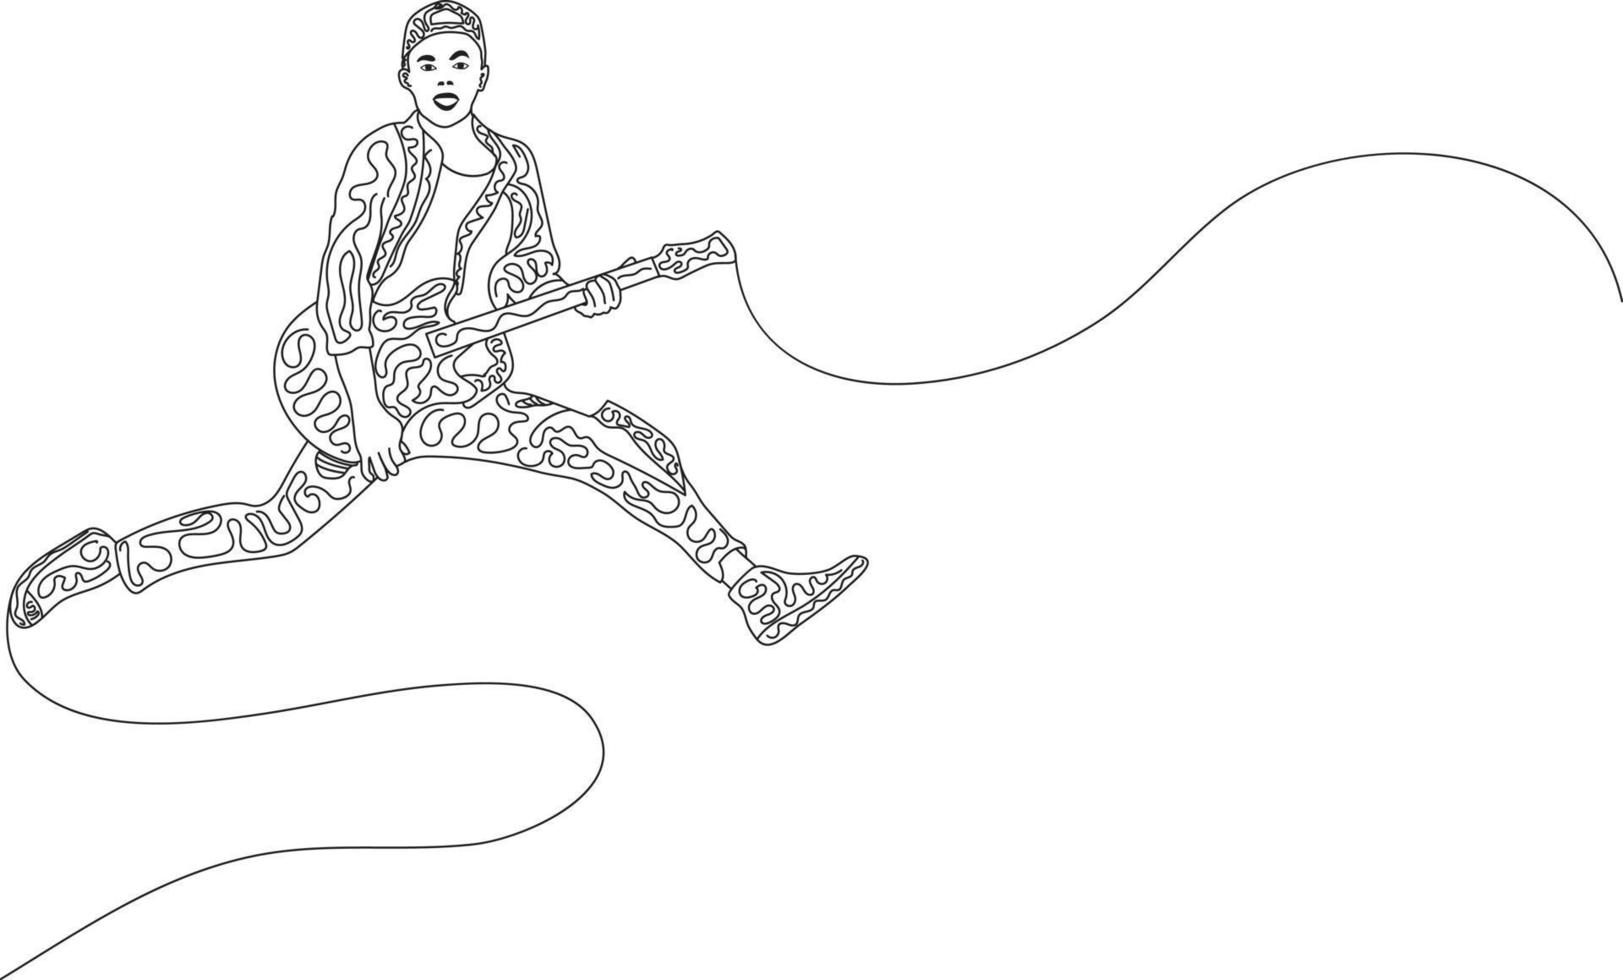 Single line art doodle art image of energetic young guitarist jumping on stage and playing guitar. Vector illustration of a continuous line drawing design. Vector illustration of doodle art design.